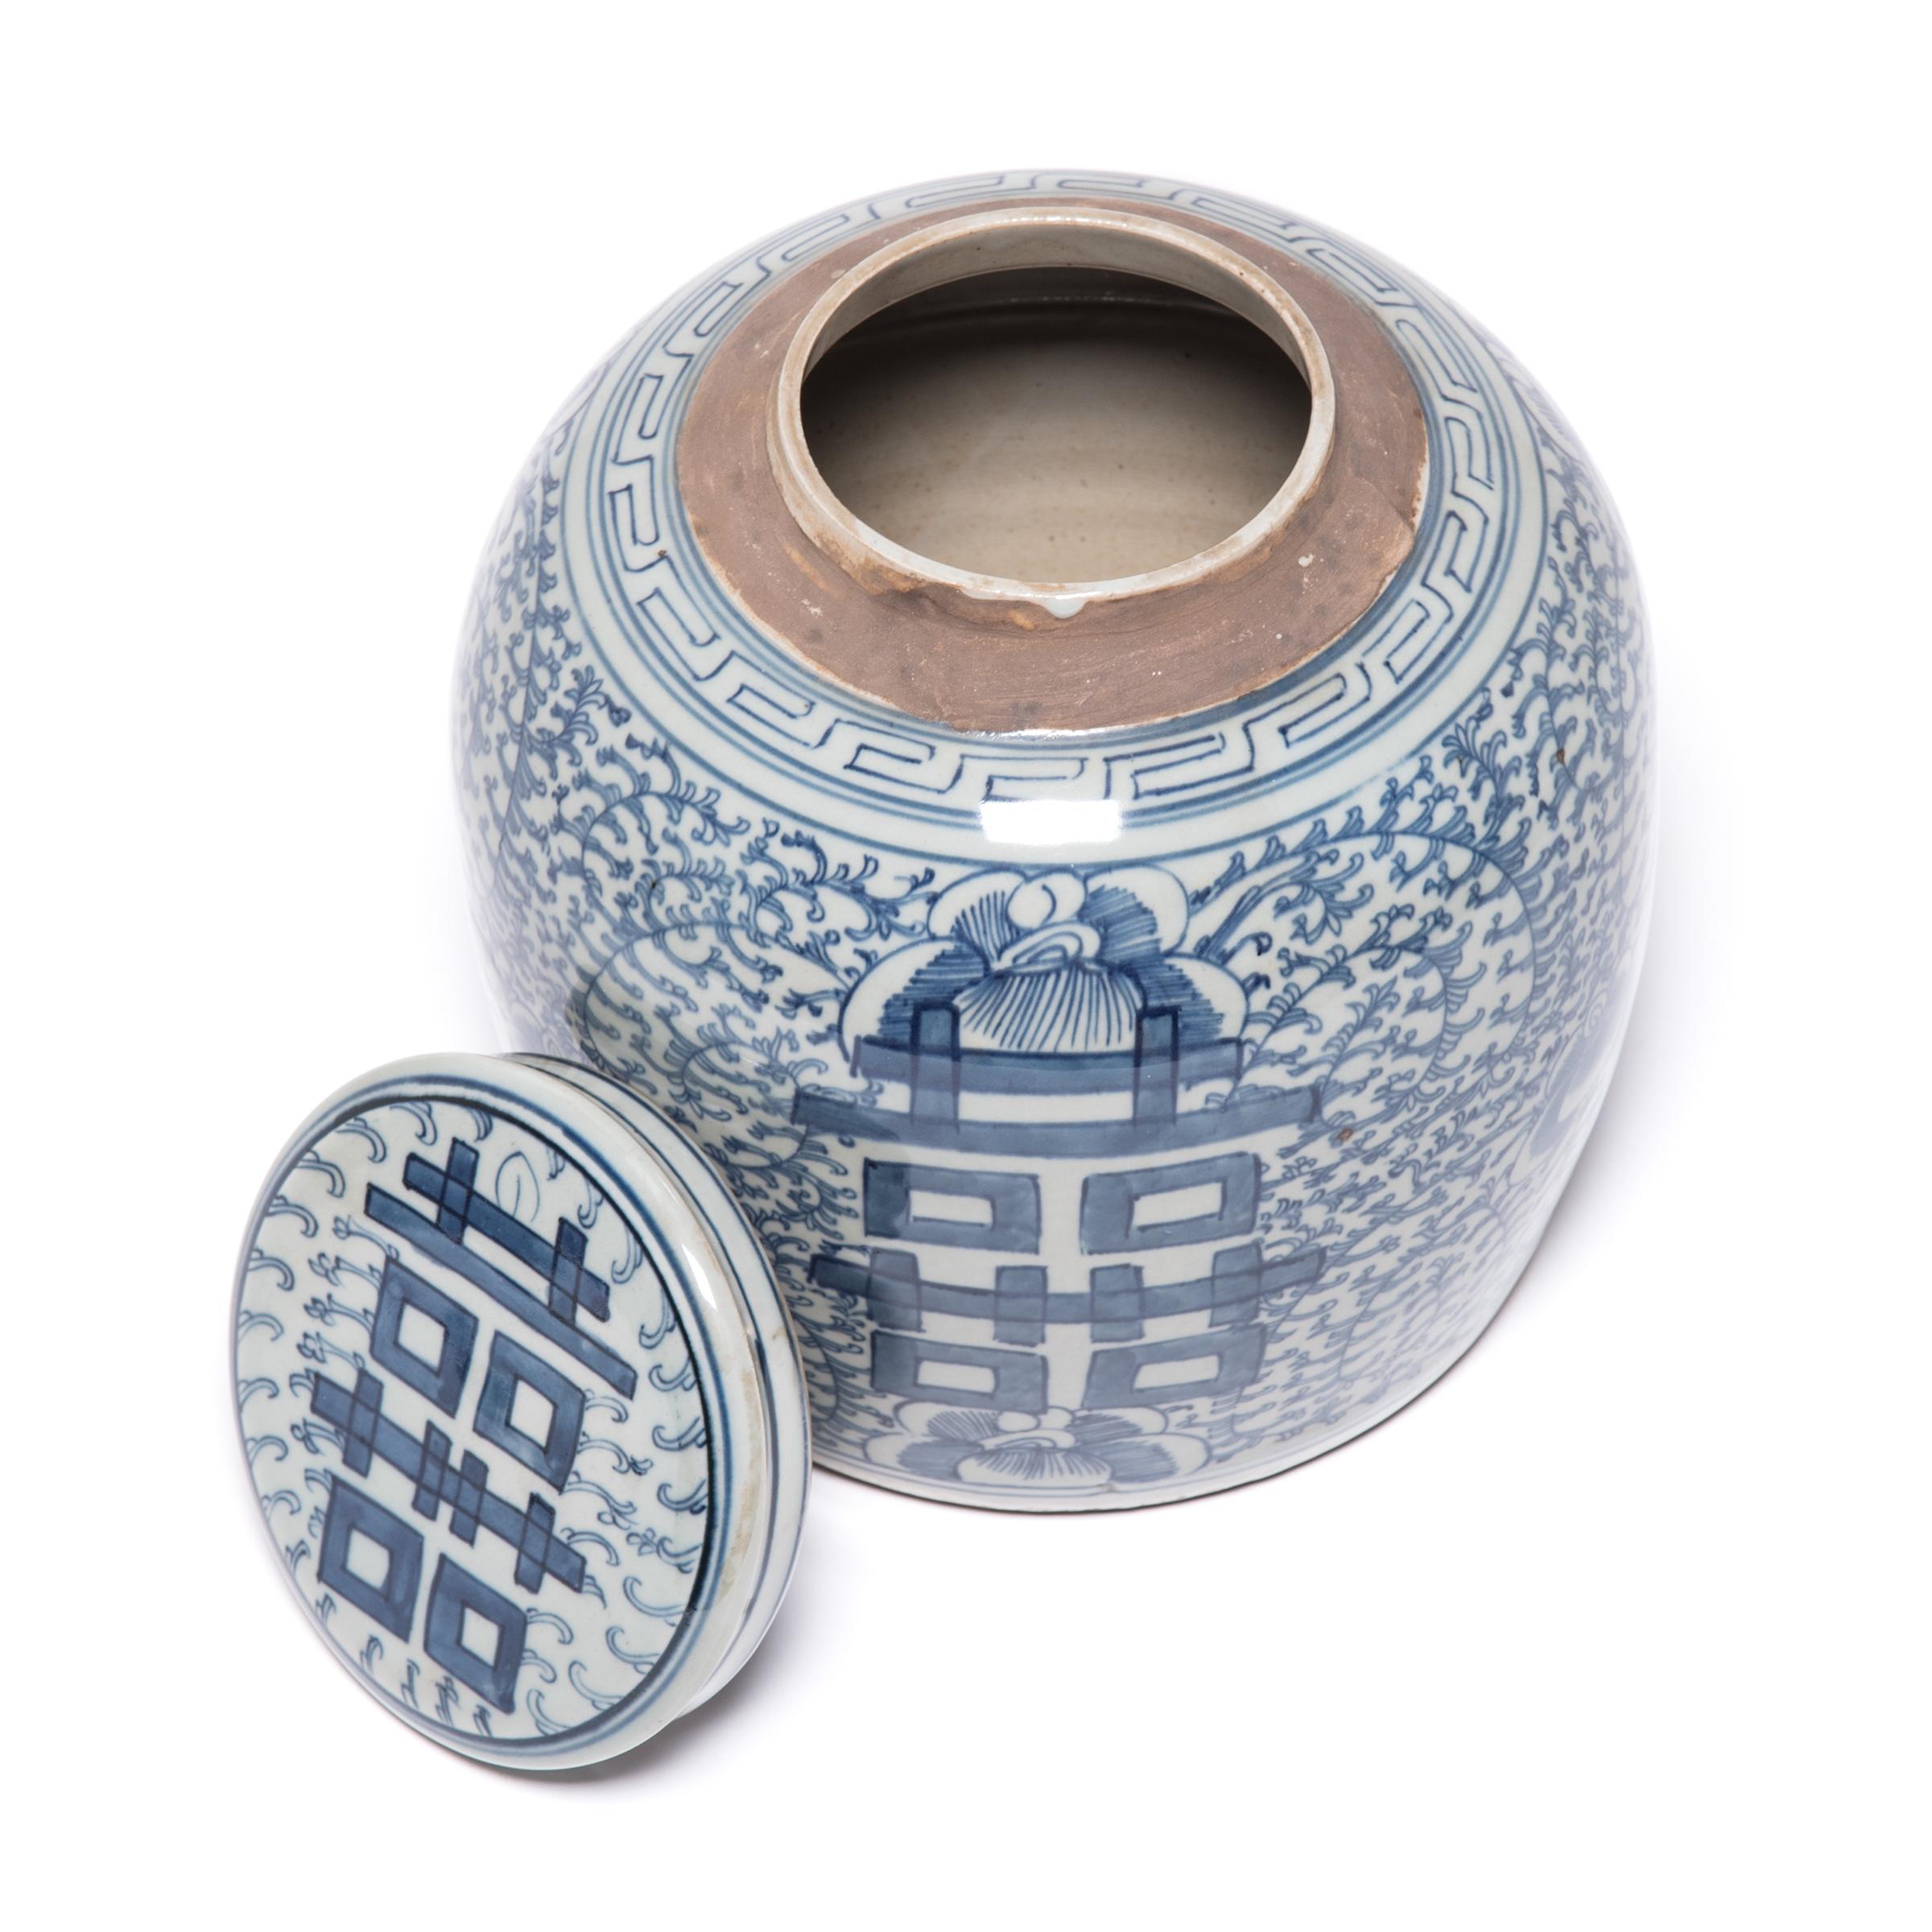 Glazed Chinese Blue and White Double Happiness Jar, circa 1900